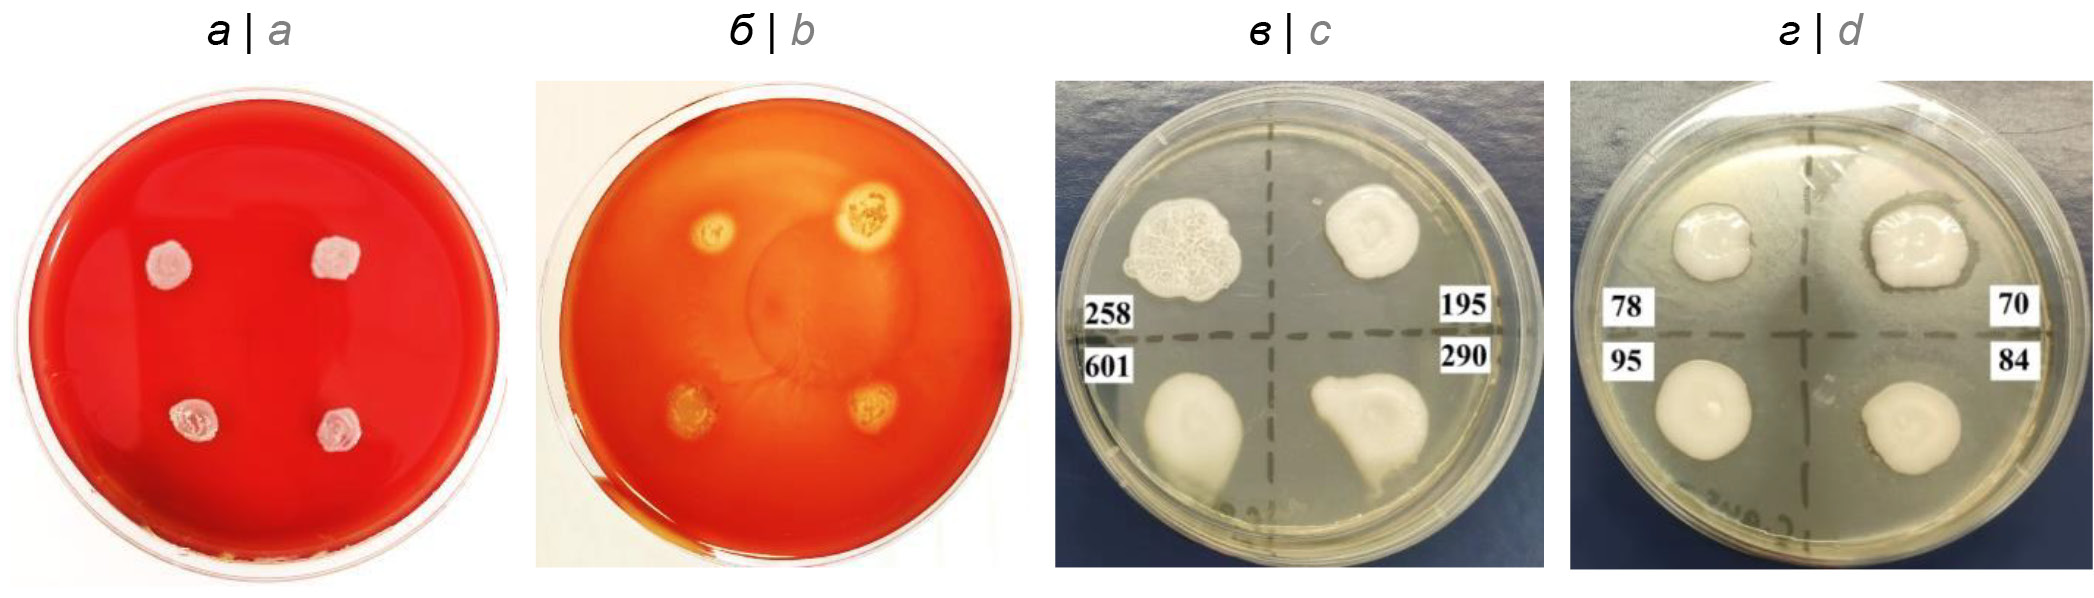 Comparative evaluation of enzyme and biocidal activity of <i>Candida auris</i> and <i>Candida albicans</i>